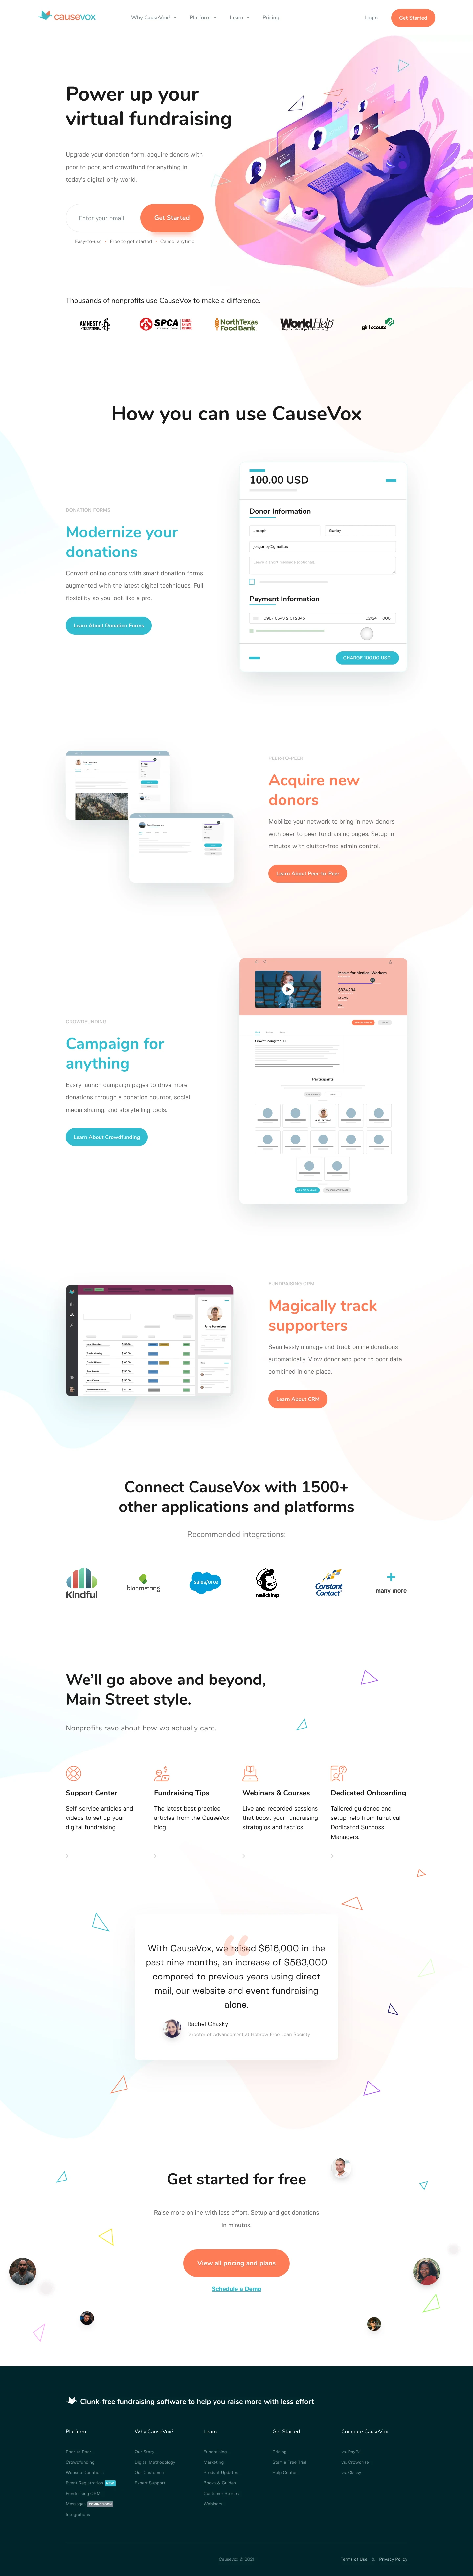 CauseVox Landing Page Example: CauseVox is an online fundraising platform for nonprofits. We help you raise more money with less effort with our clunk-free, easy-to-use software.